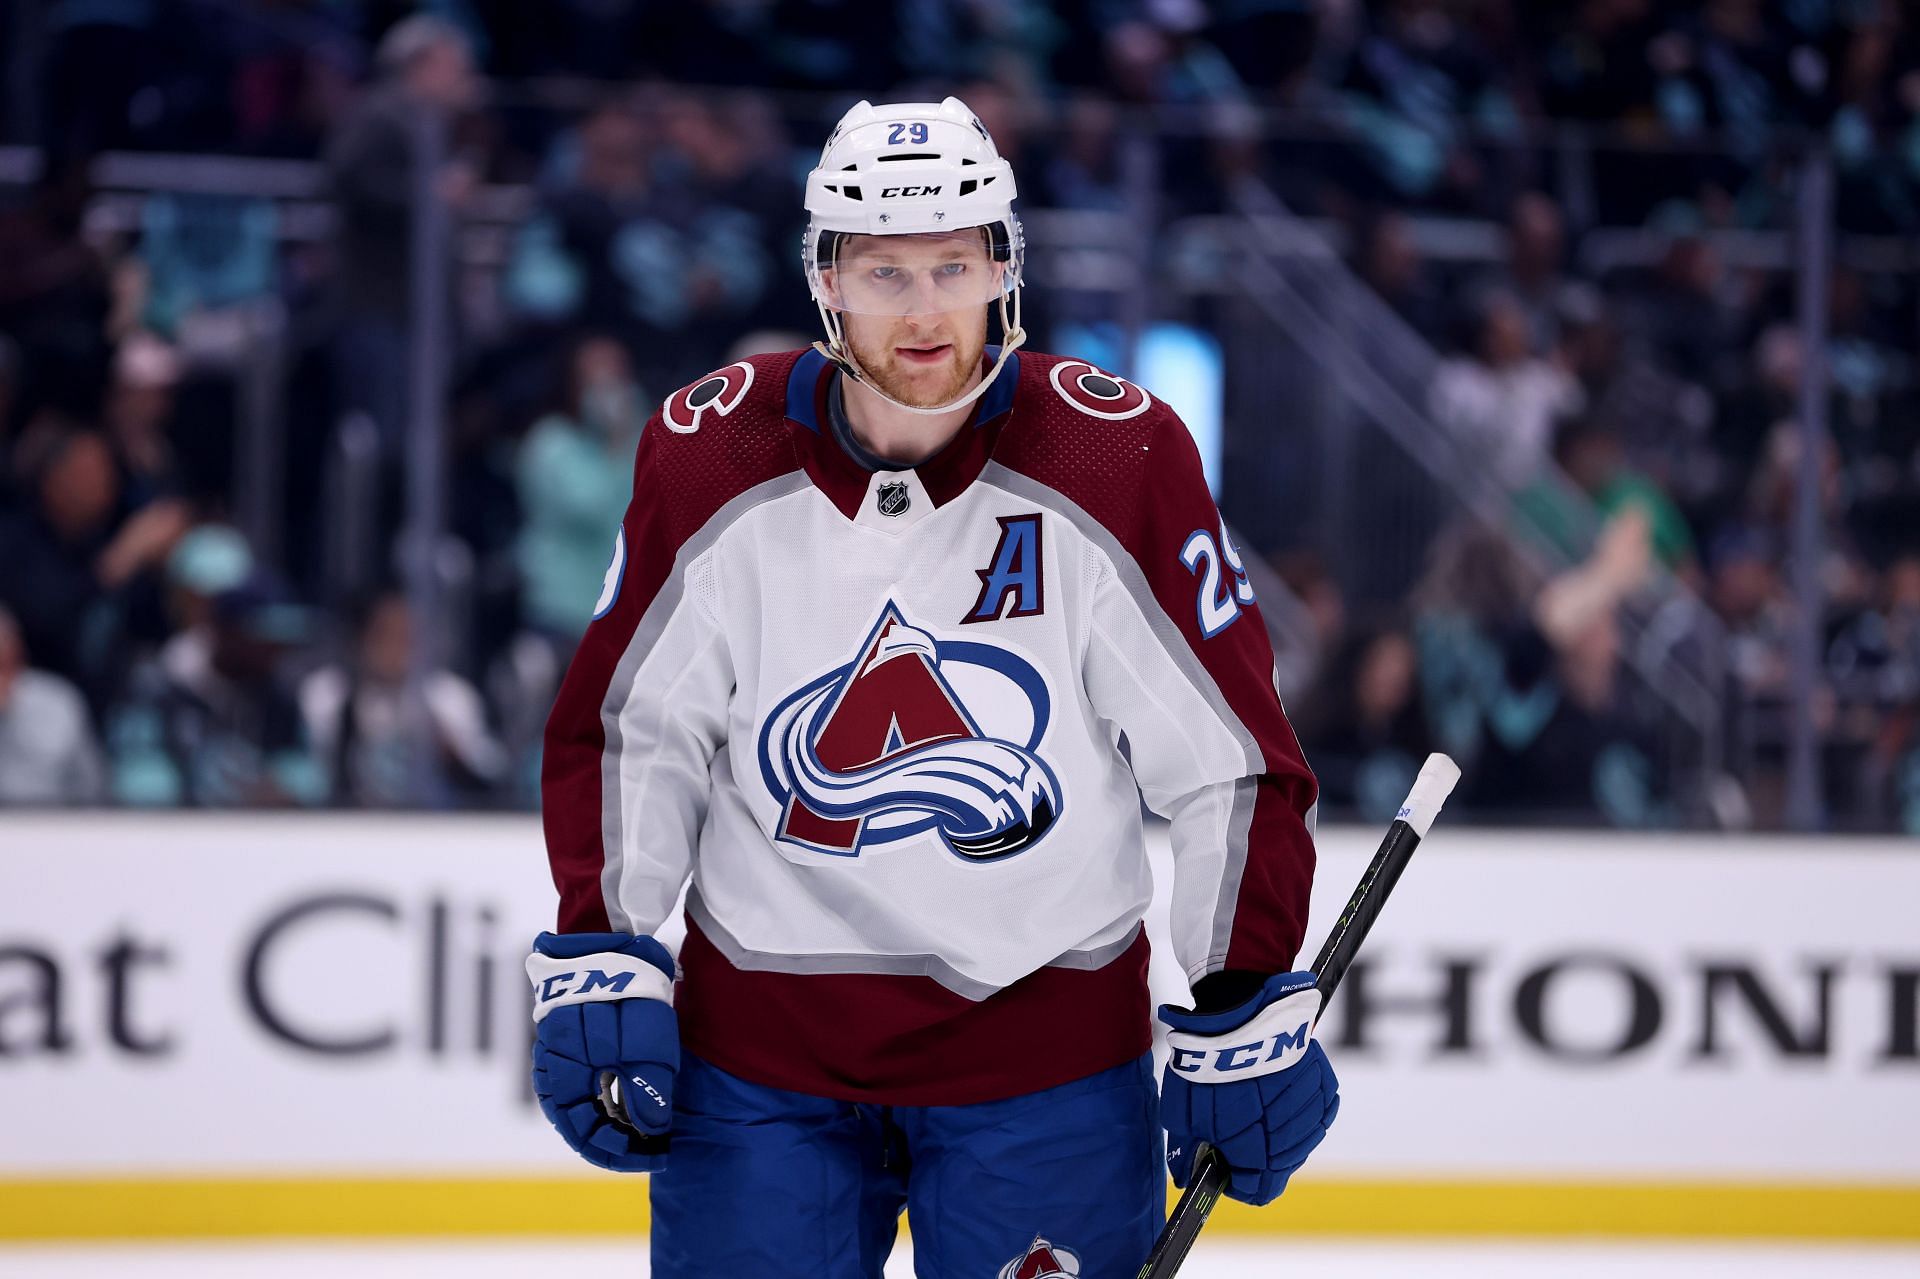 Colorado Avalanche now have three NHL players from Nova Scotia